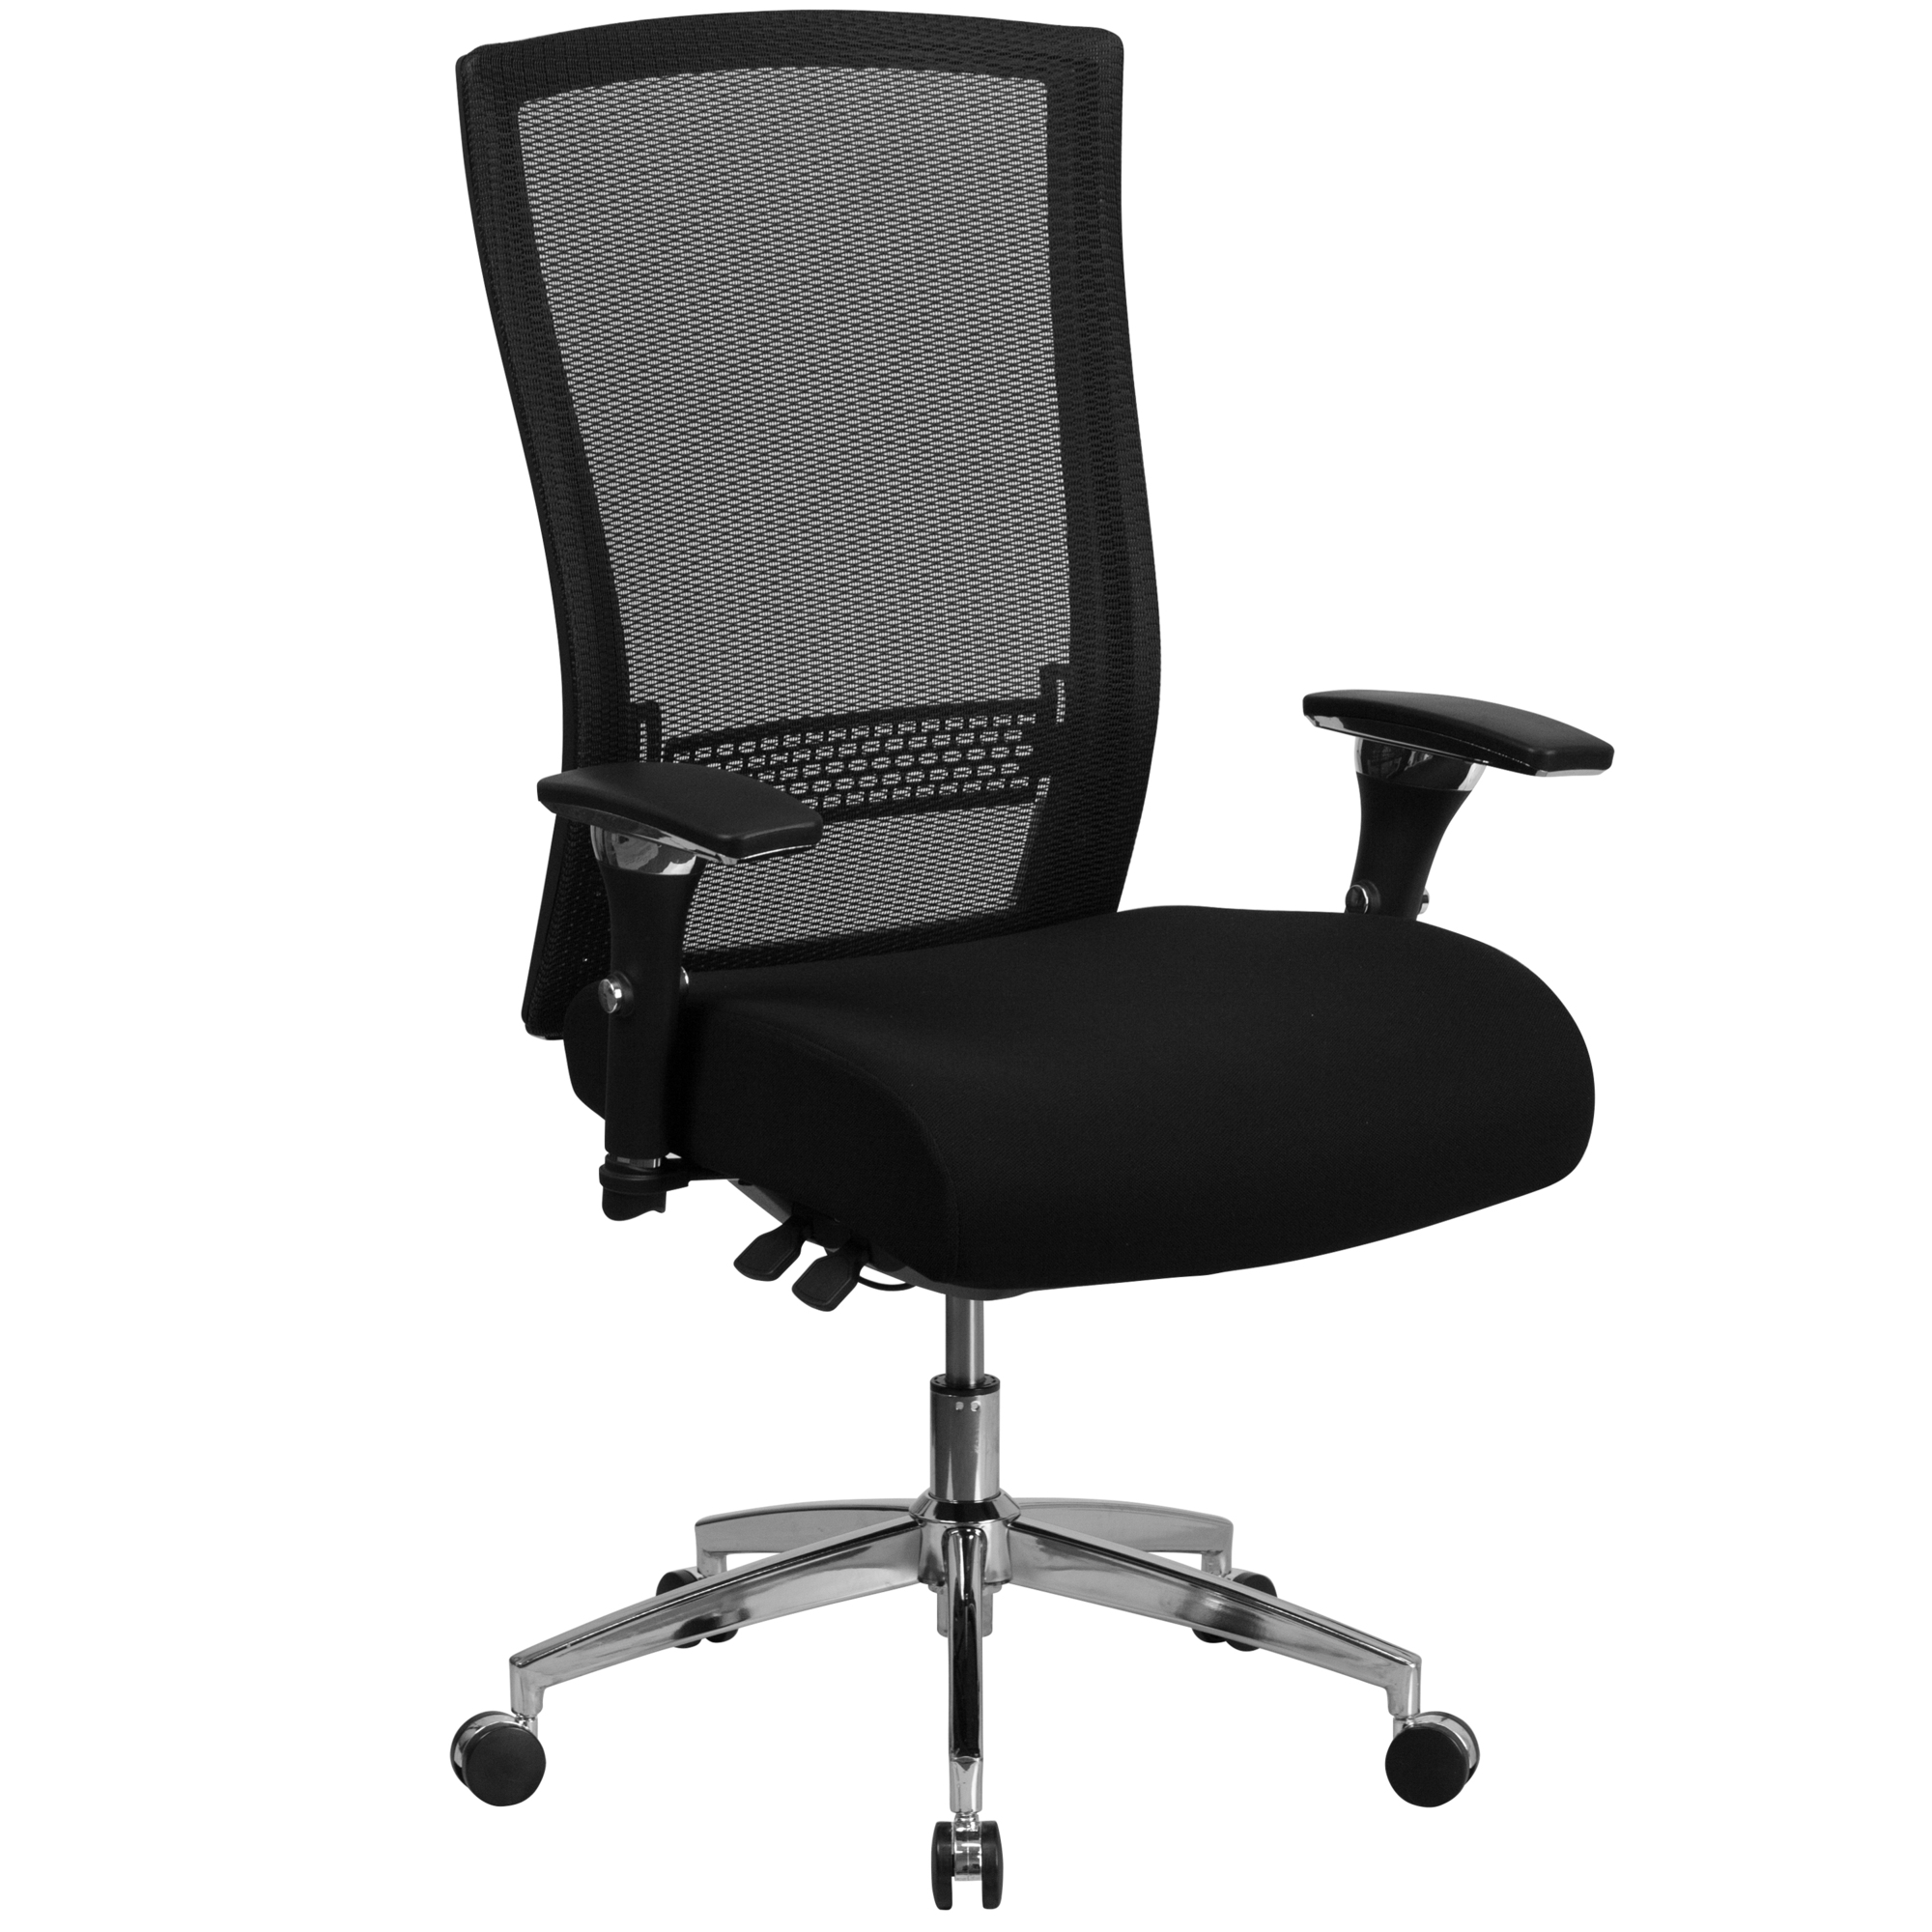 Flash Furniture, 24/7 300 lb. Rated High Back Black Mesh Chair, Primary Color Black, Included (qty.) 1, Model GOWY85H